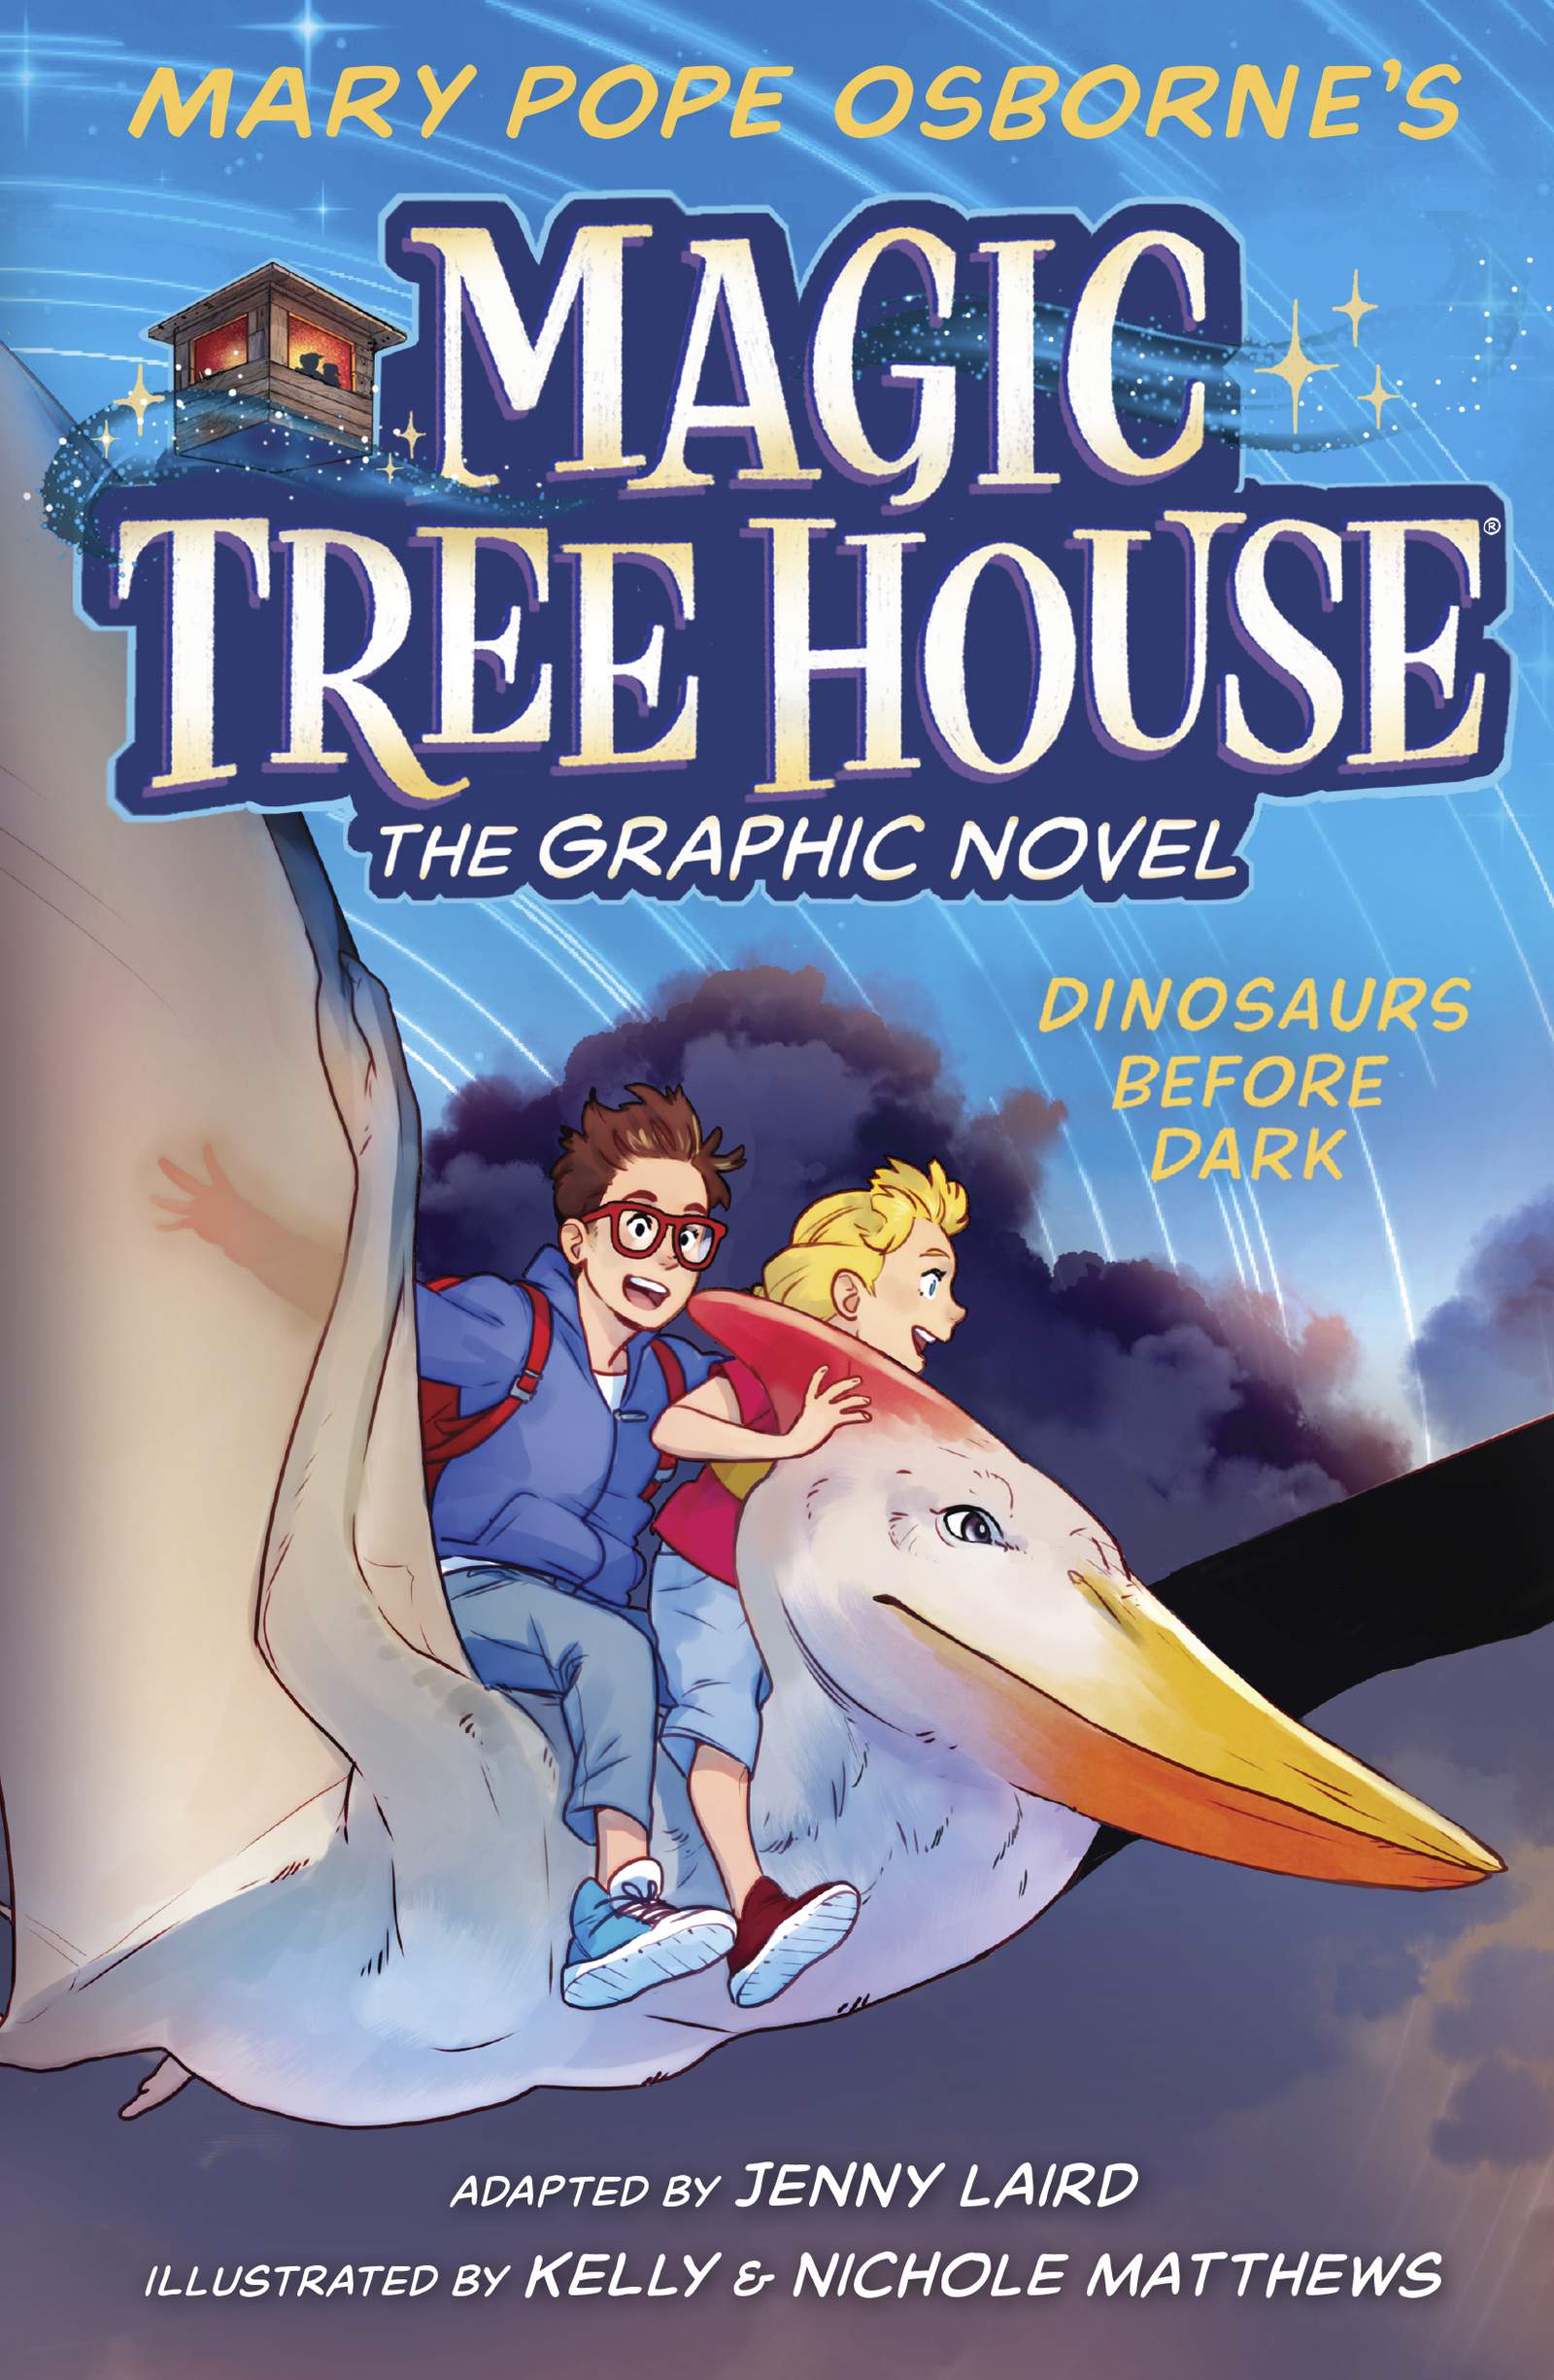 'Magic Tree House' books to be adapted into graphic novels